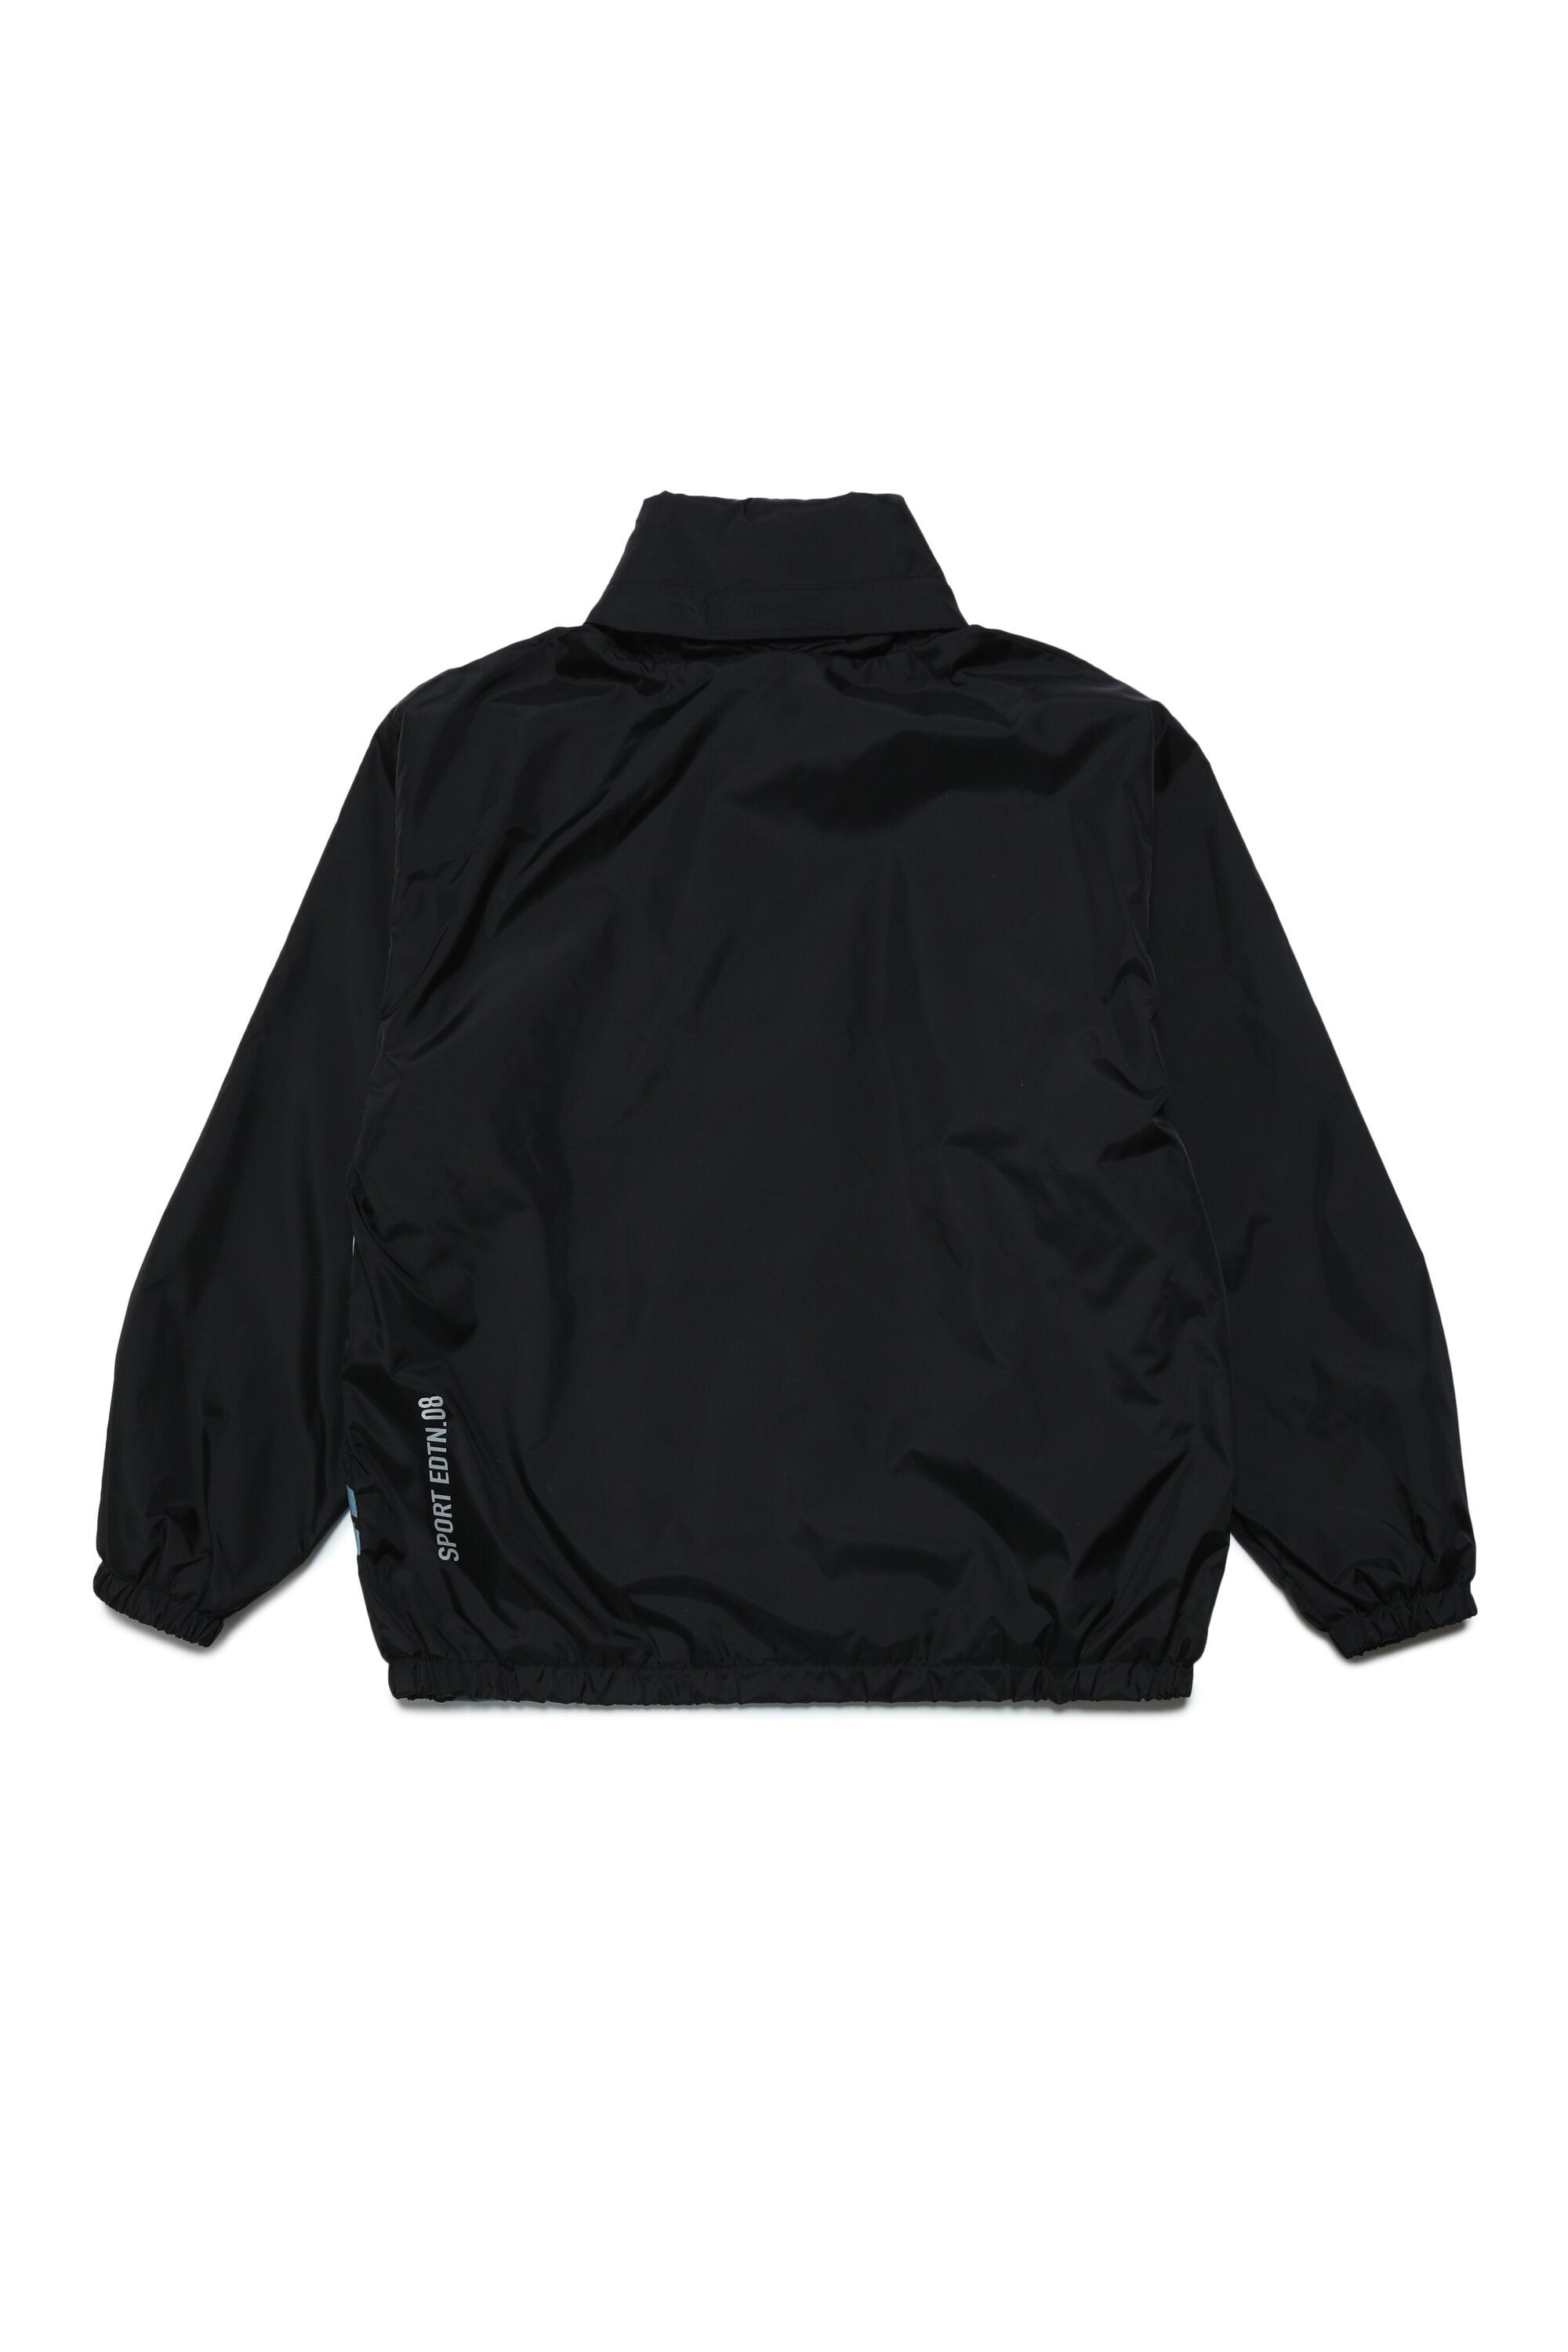 Lightweight jacket with 3D Cube logo